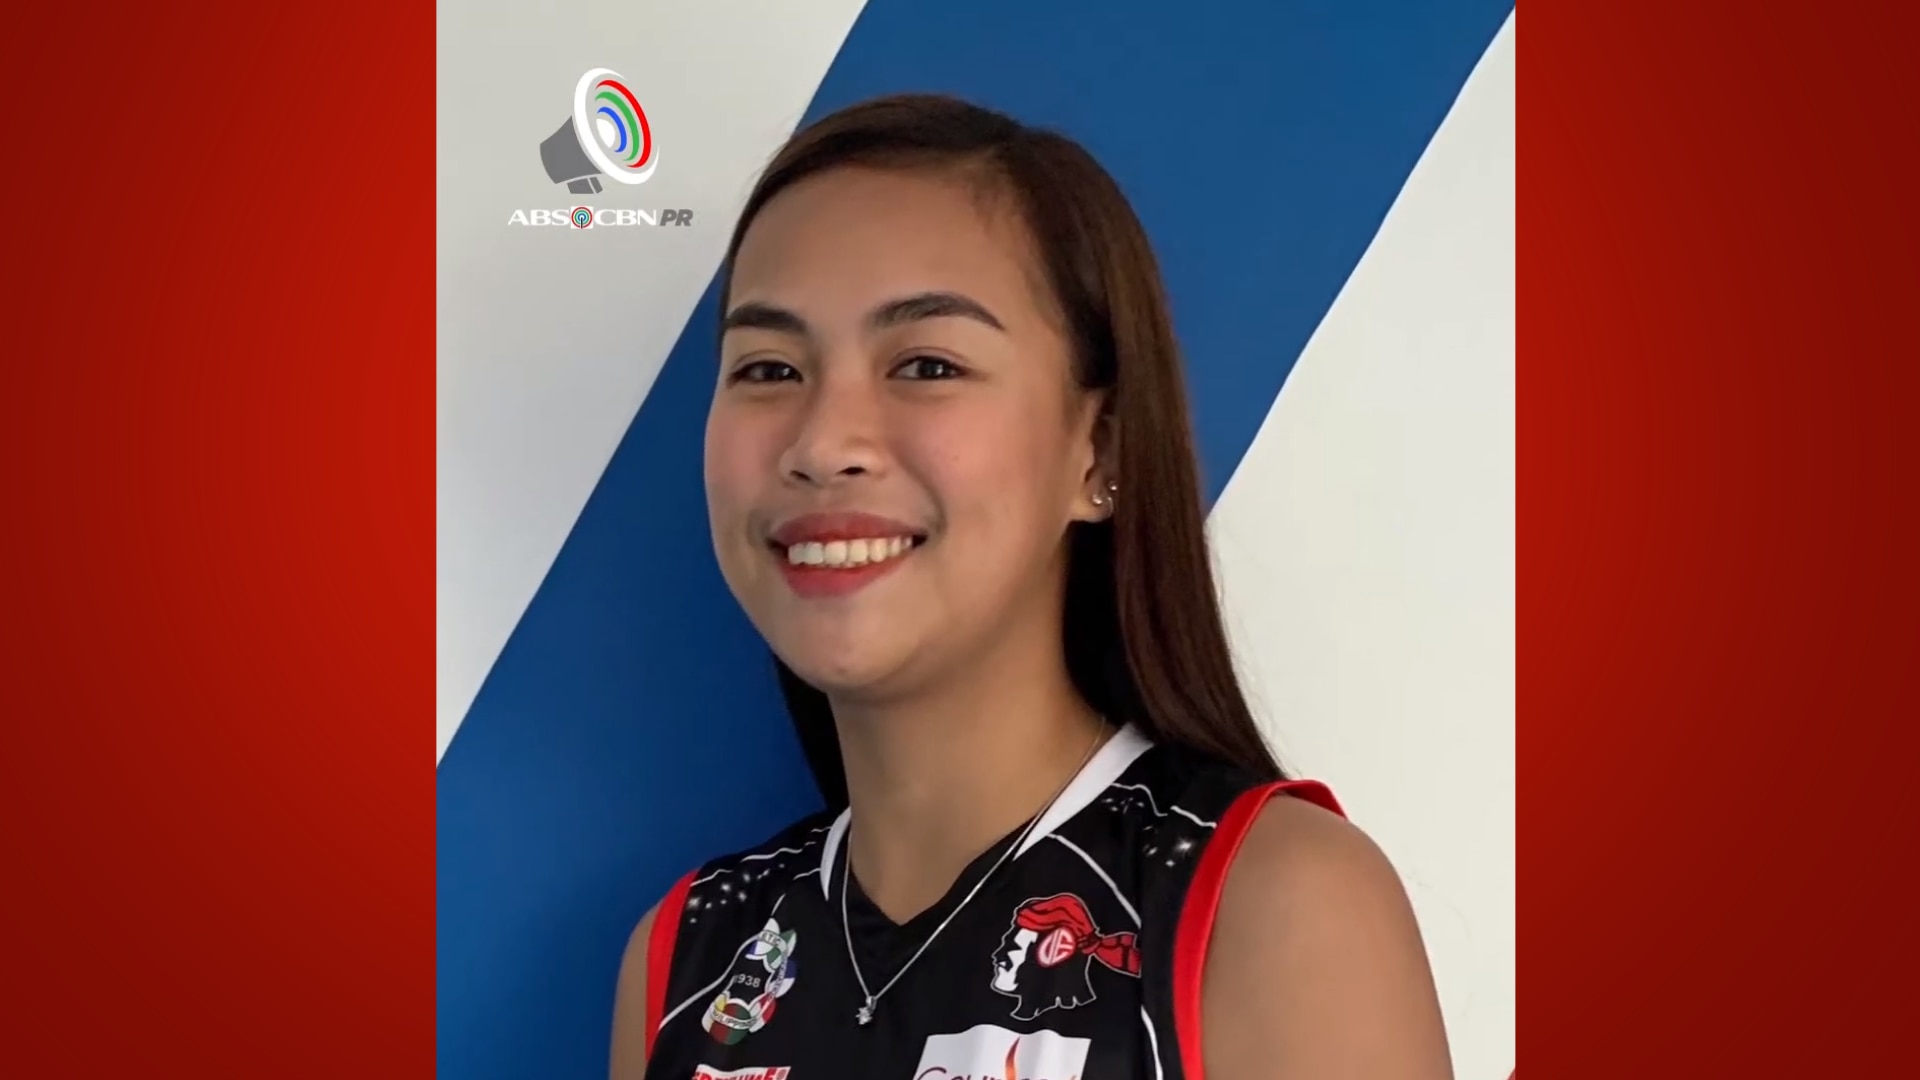 UE rookie Apple Lingay starts her UAAP journey with Mamba Mentality